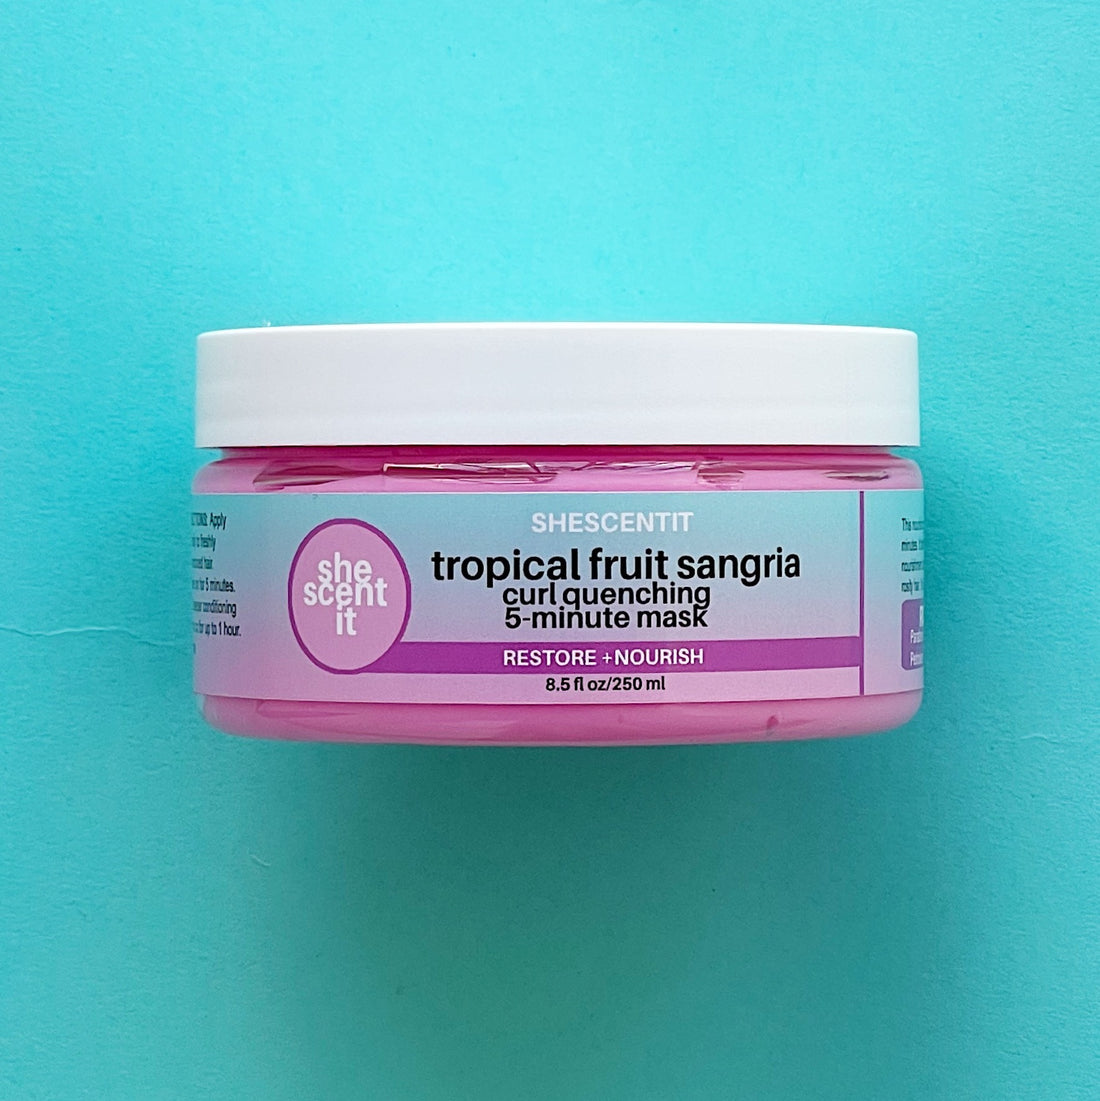 Tropical Fruit Sangria Curl Quenching 5-Minute Mask